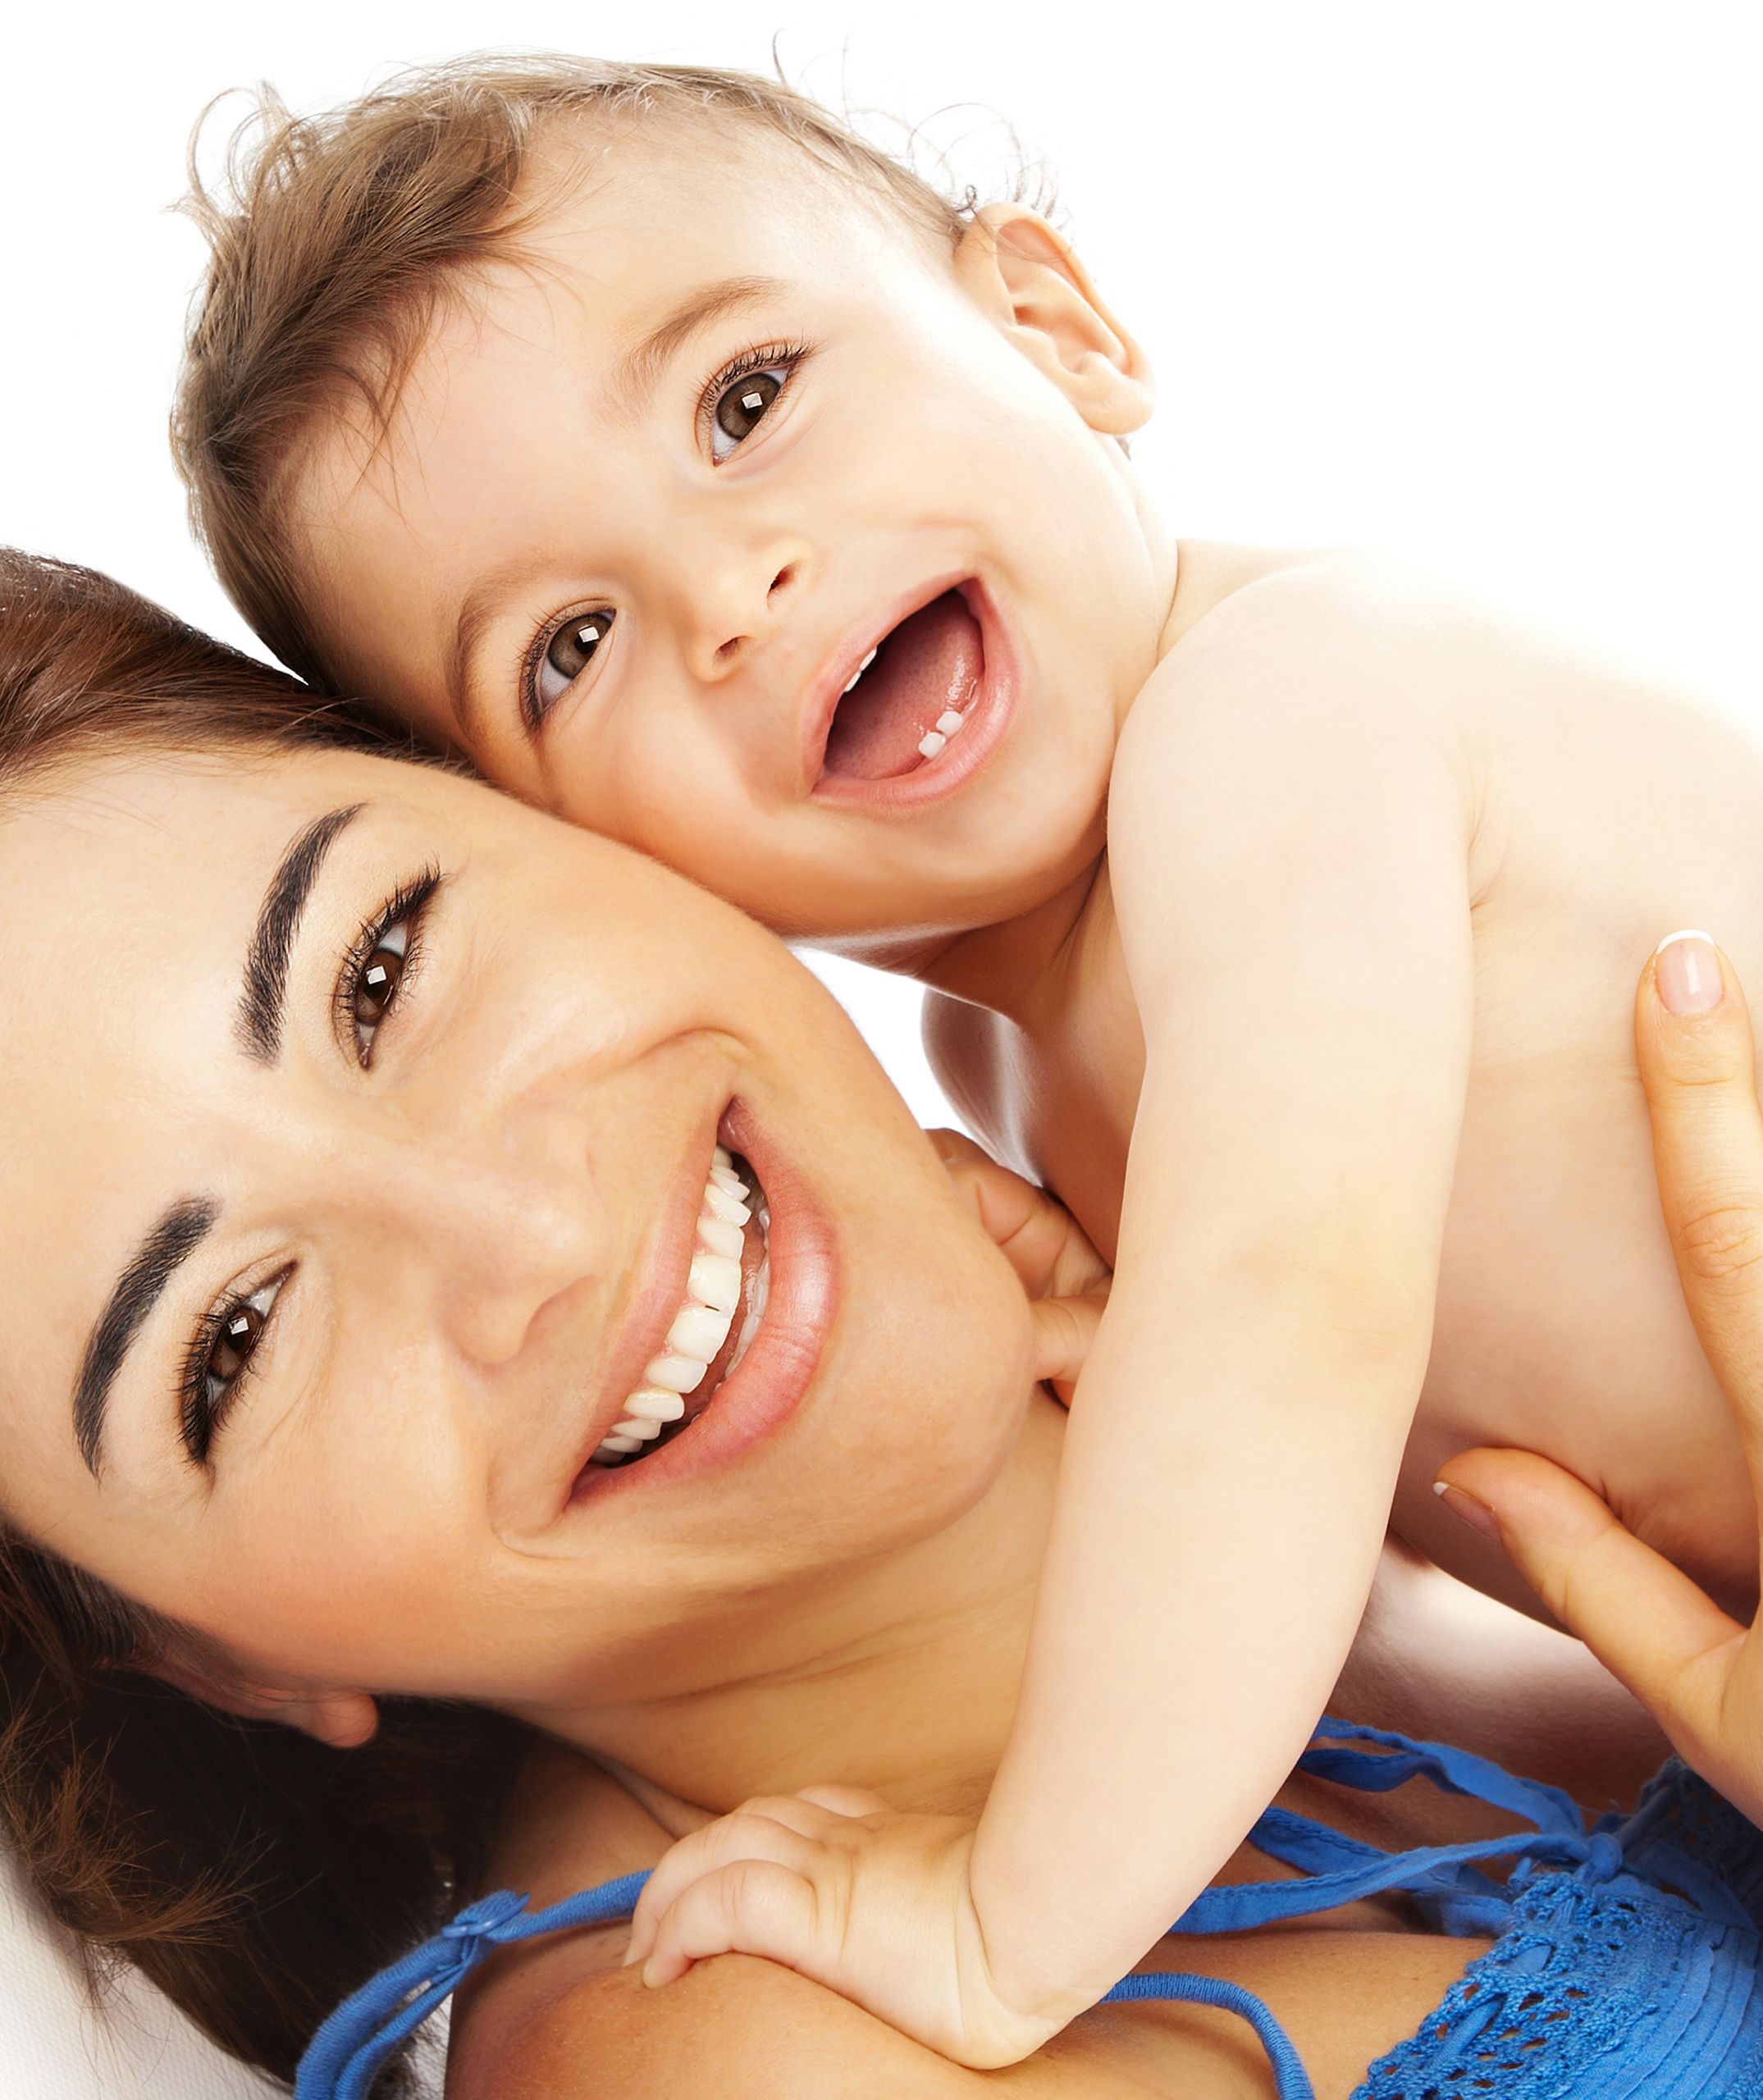 Does Heartburn Mean Your Baby Will Have Hair
 How to look after baby teeth & their dental care